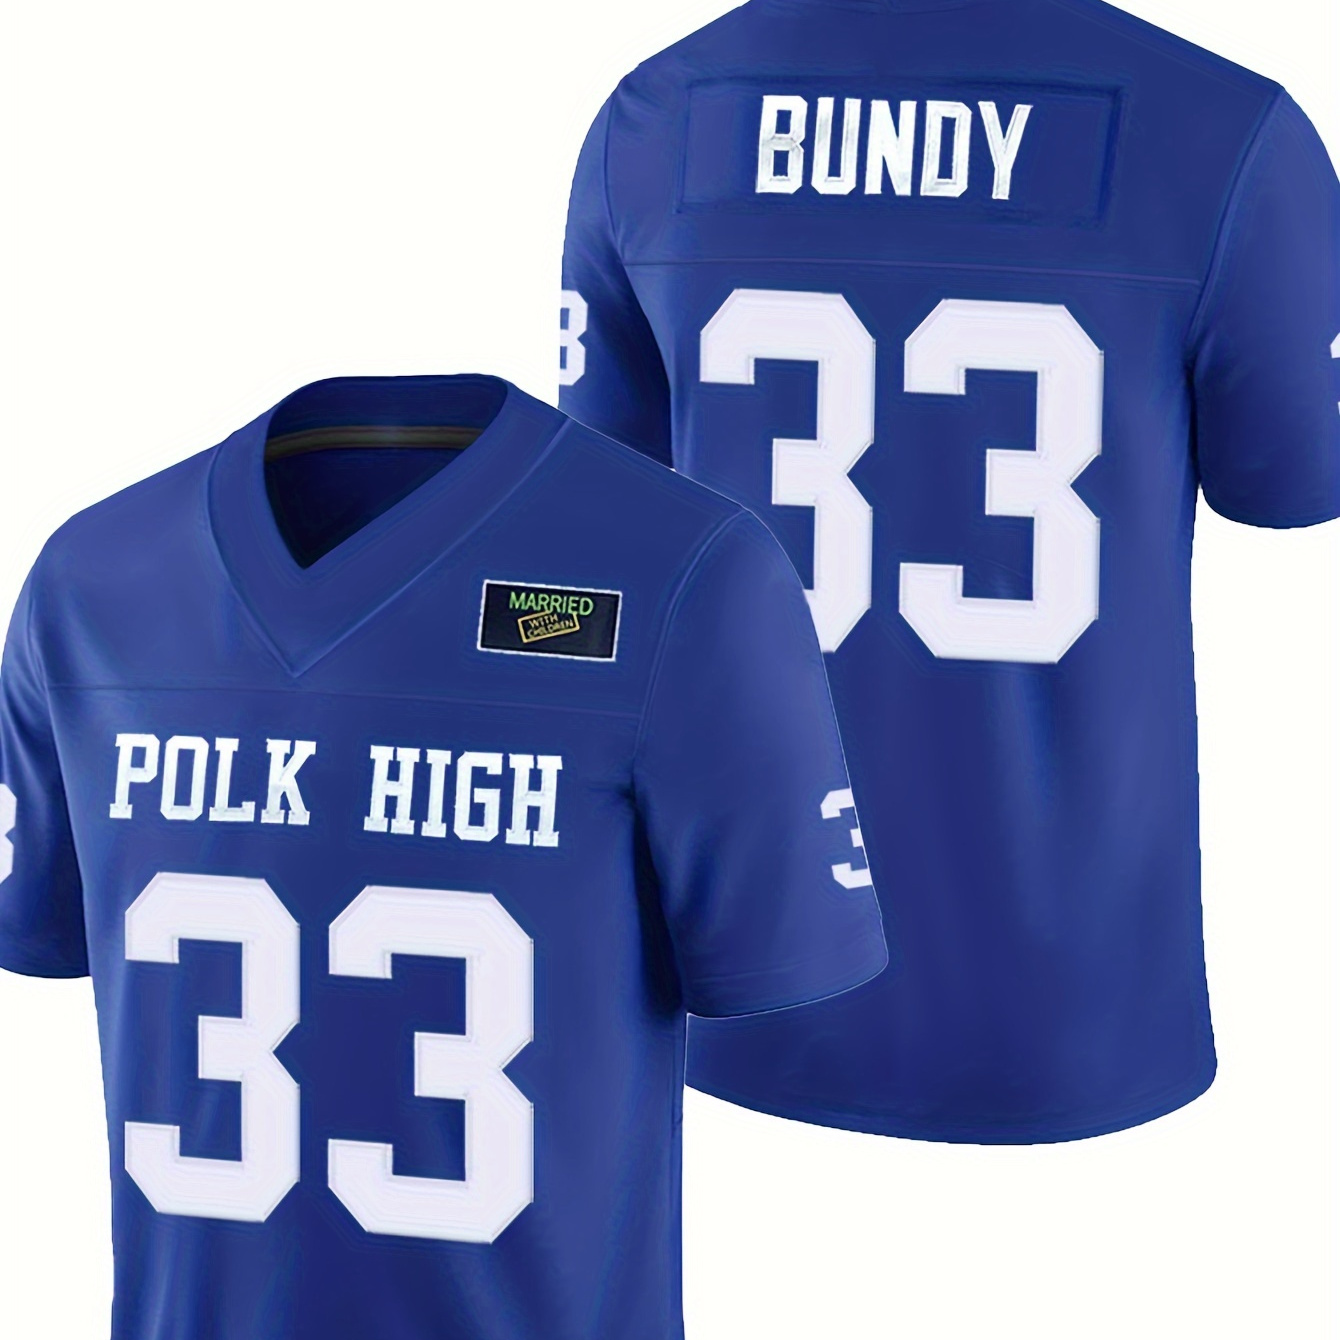 

Men's Blue # 33 American Football Jersey Loose Embroidered Sports, Fashion And Casual, Street Breathable Football Jersey